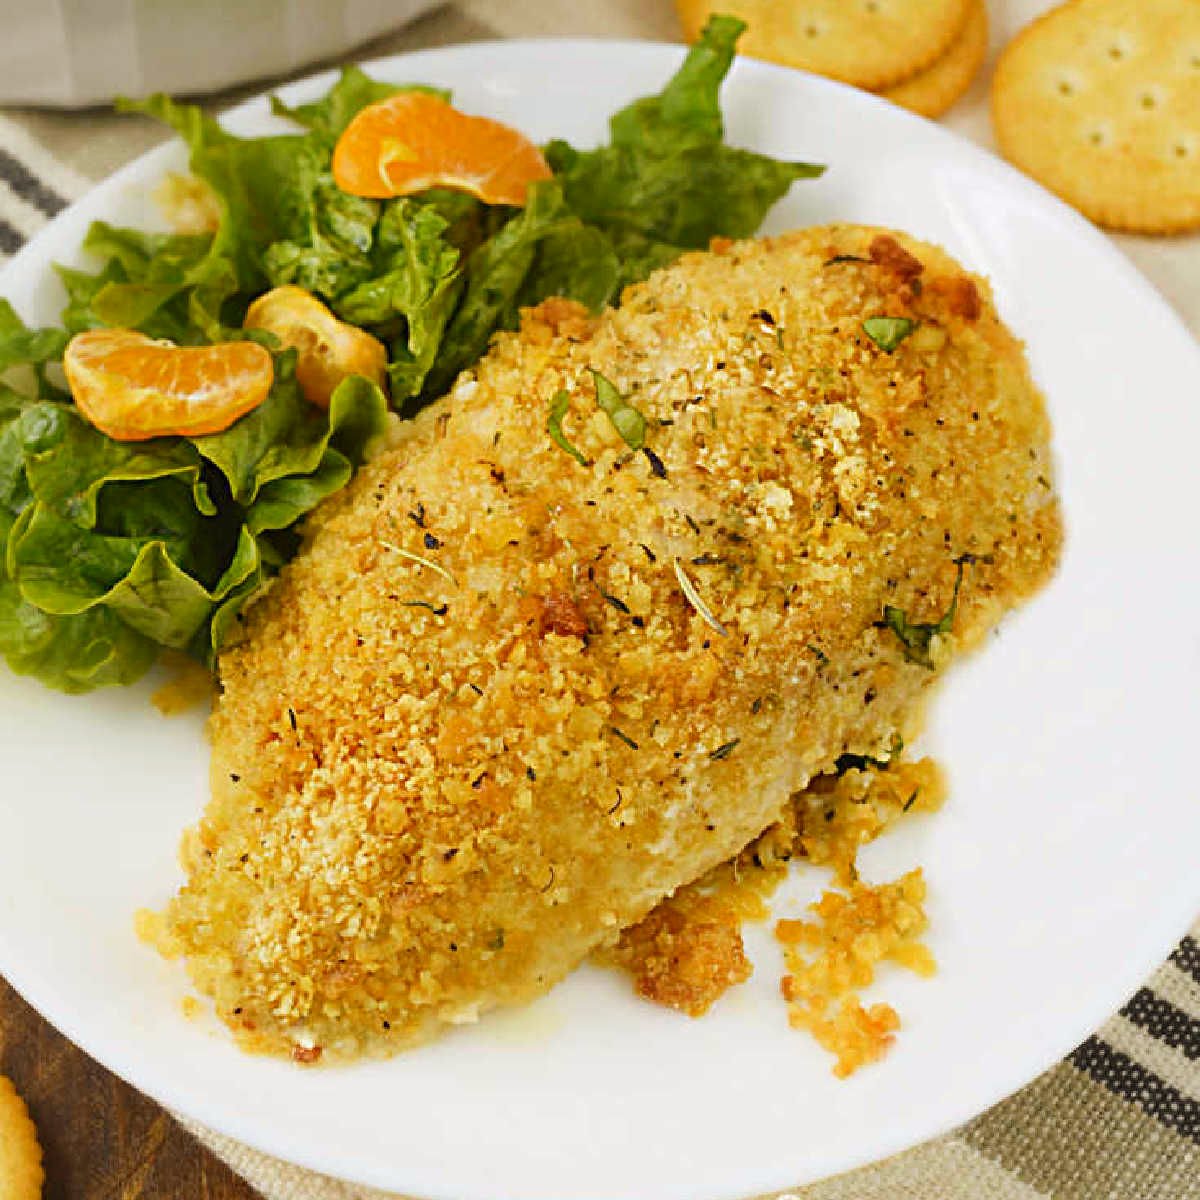 ritz cracker chicken breast on plate with salad